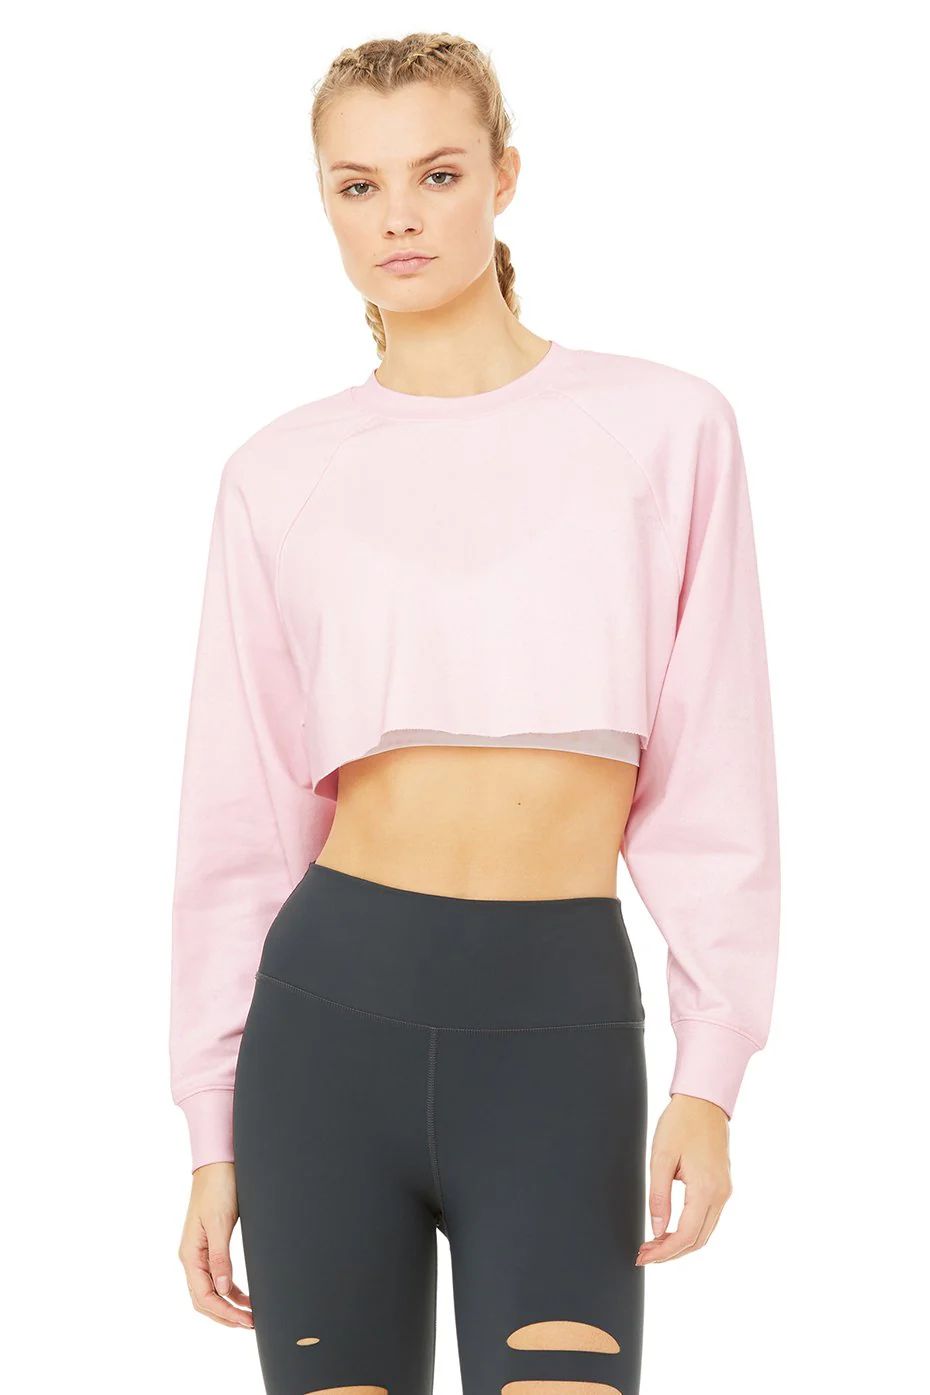 Alo YogaÂ® | Double Take Pullover - Soft Pink Top in Soft Pink*, Size: Large | Alo Yoga